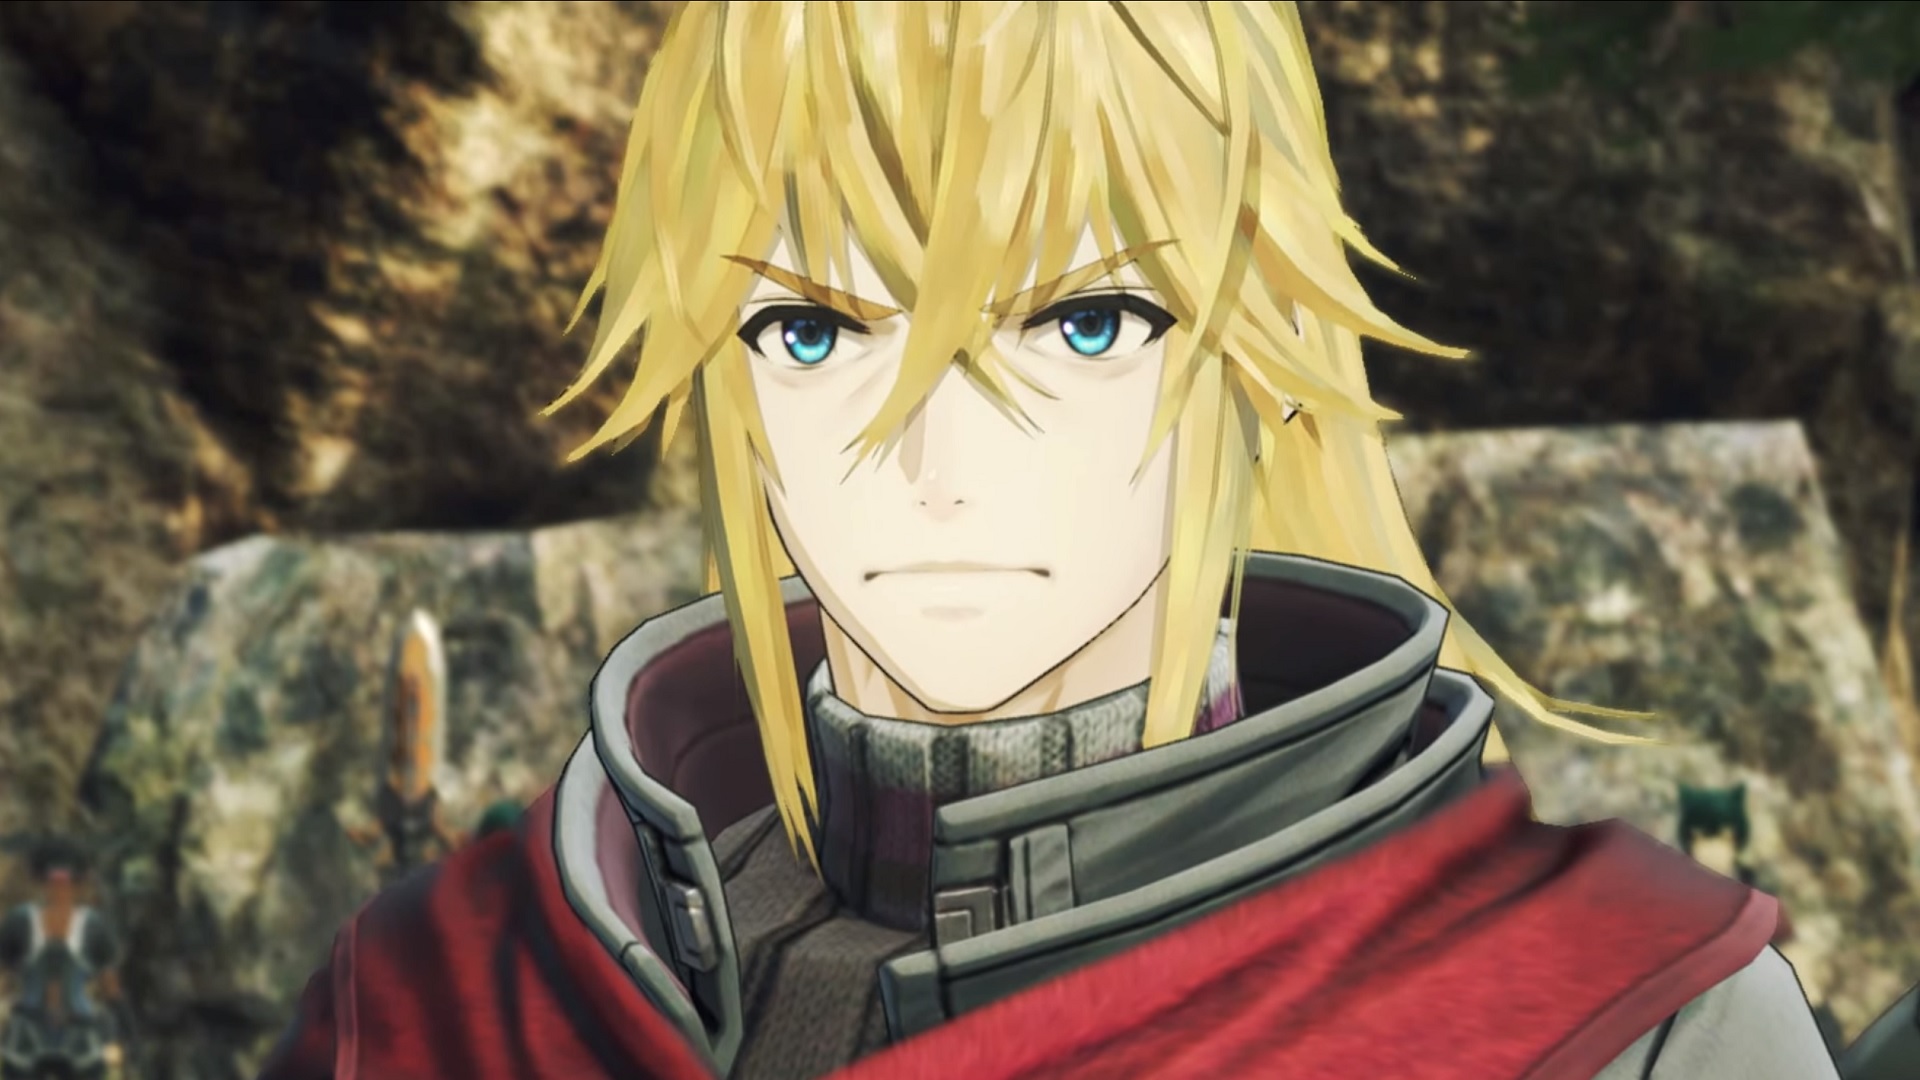 Xenoblade Chronicles 3: Shulk and Rex reveal stirs up fan theories